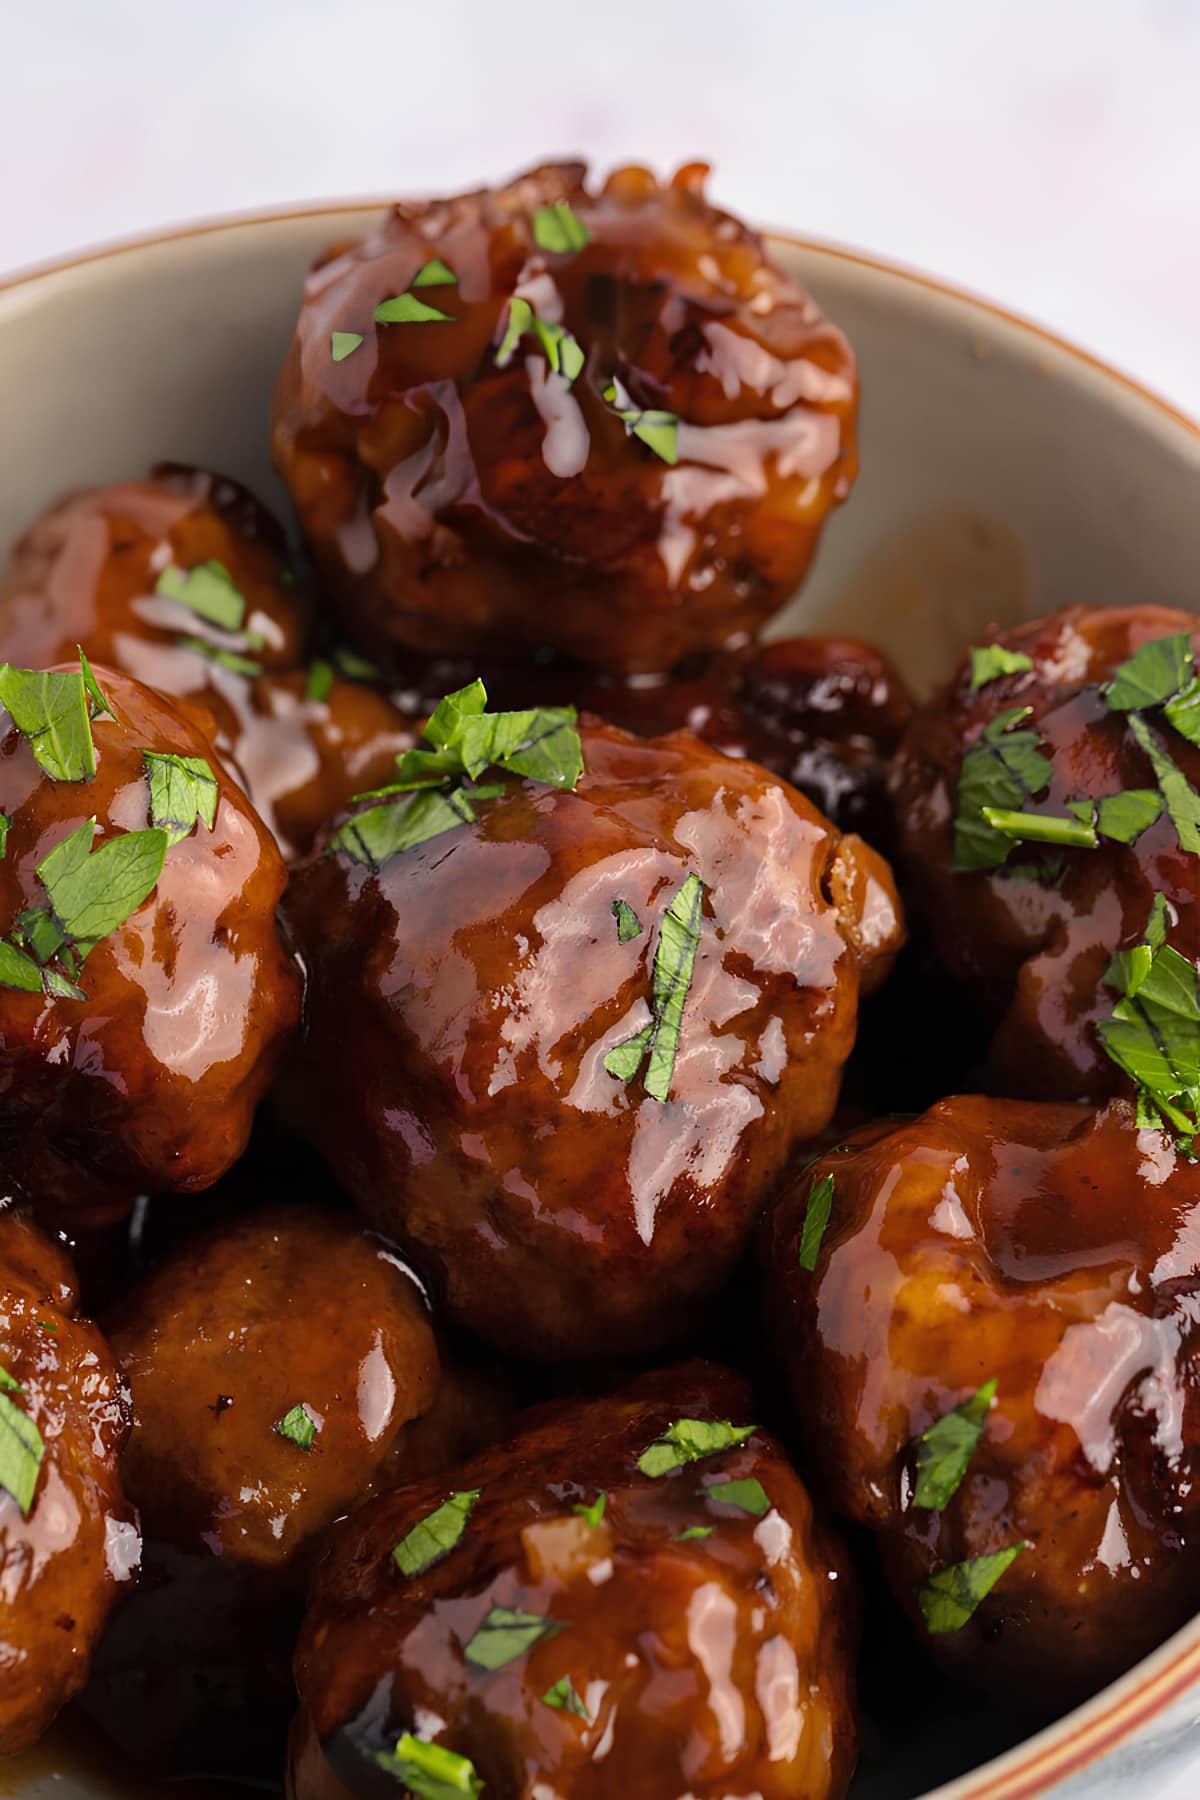 Delicious and Meaty Sweet and Sour Meatballs